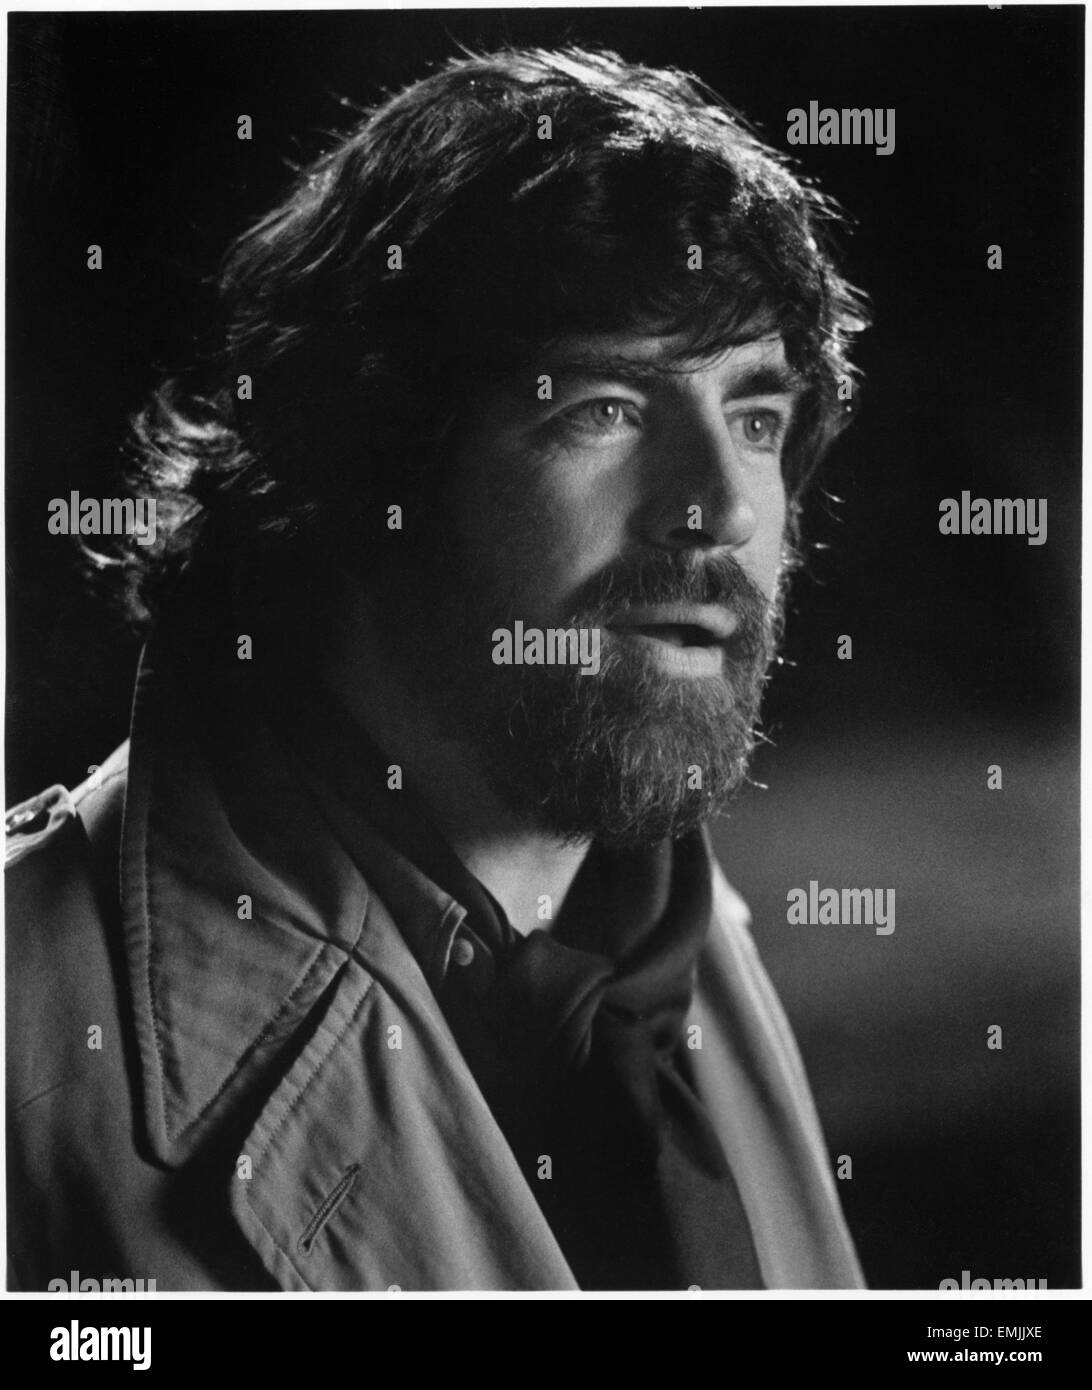 Alan Bates, on-set of the Film 'An Unmarried Woman', 1978, 20th Century Fox, all rights reserved Stock Photo